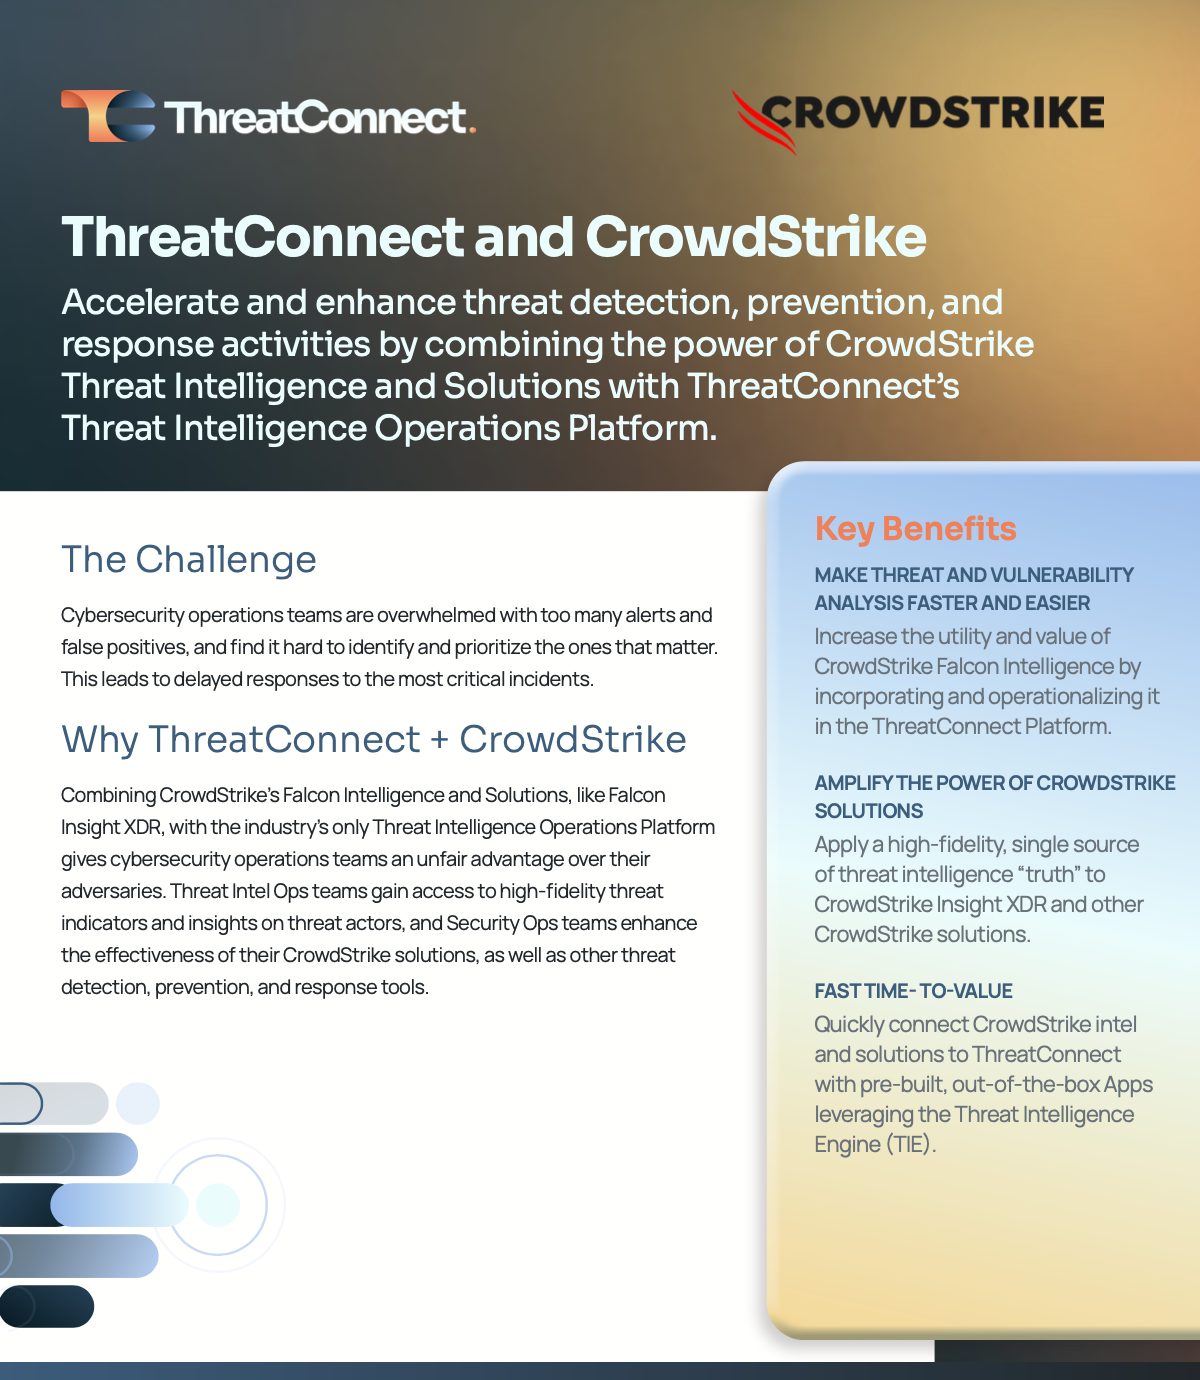 ThreatConnect and CrowdStrike Falcon Intelligence case study on how the platforms work together for threat intelligence operations